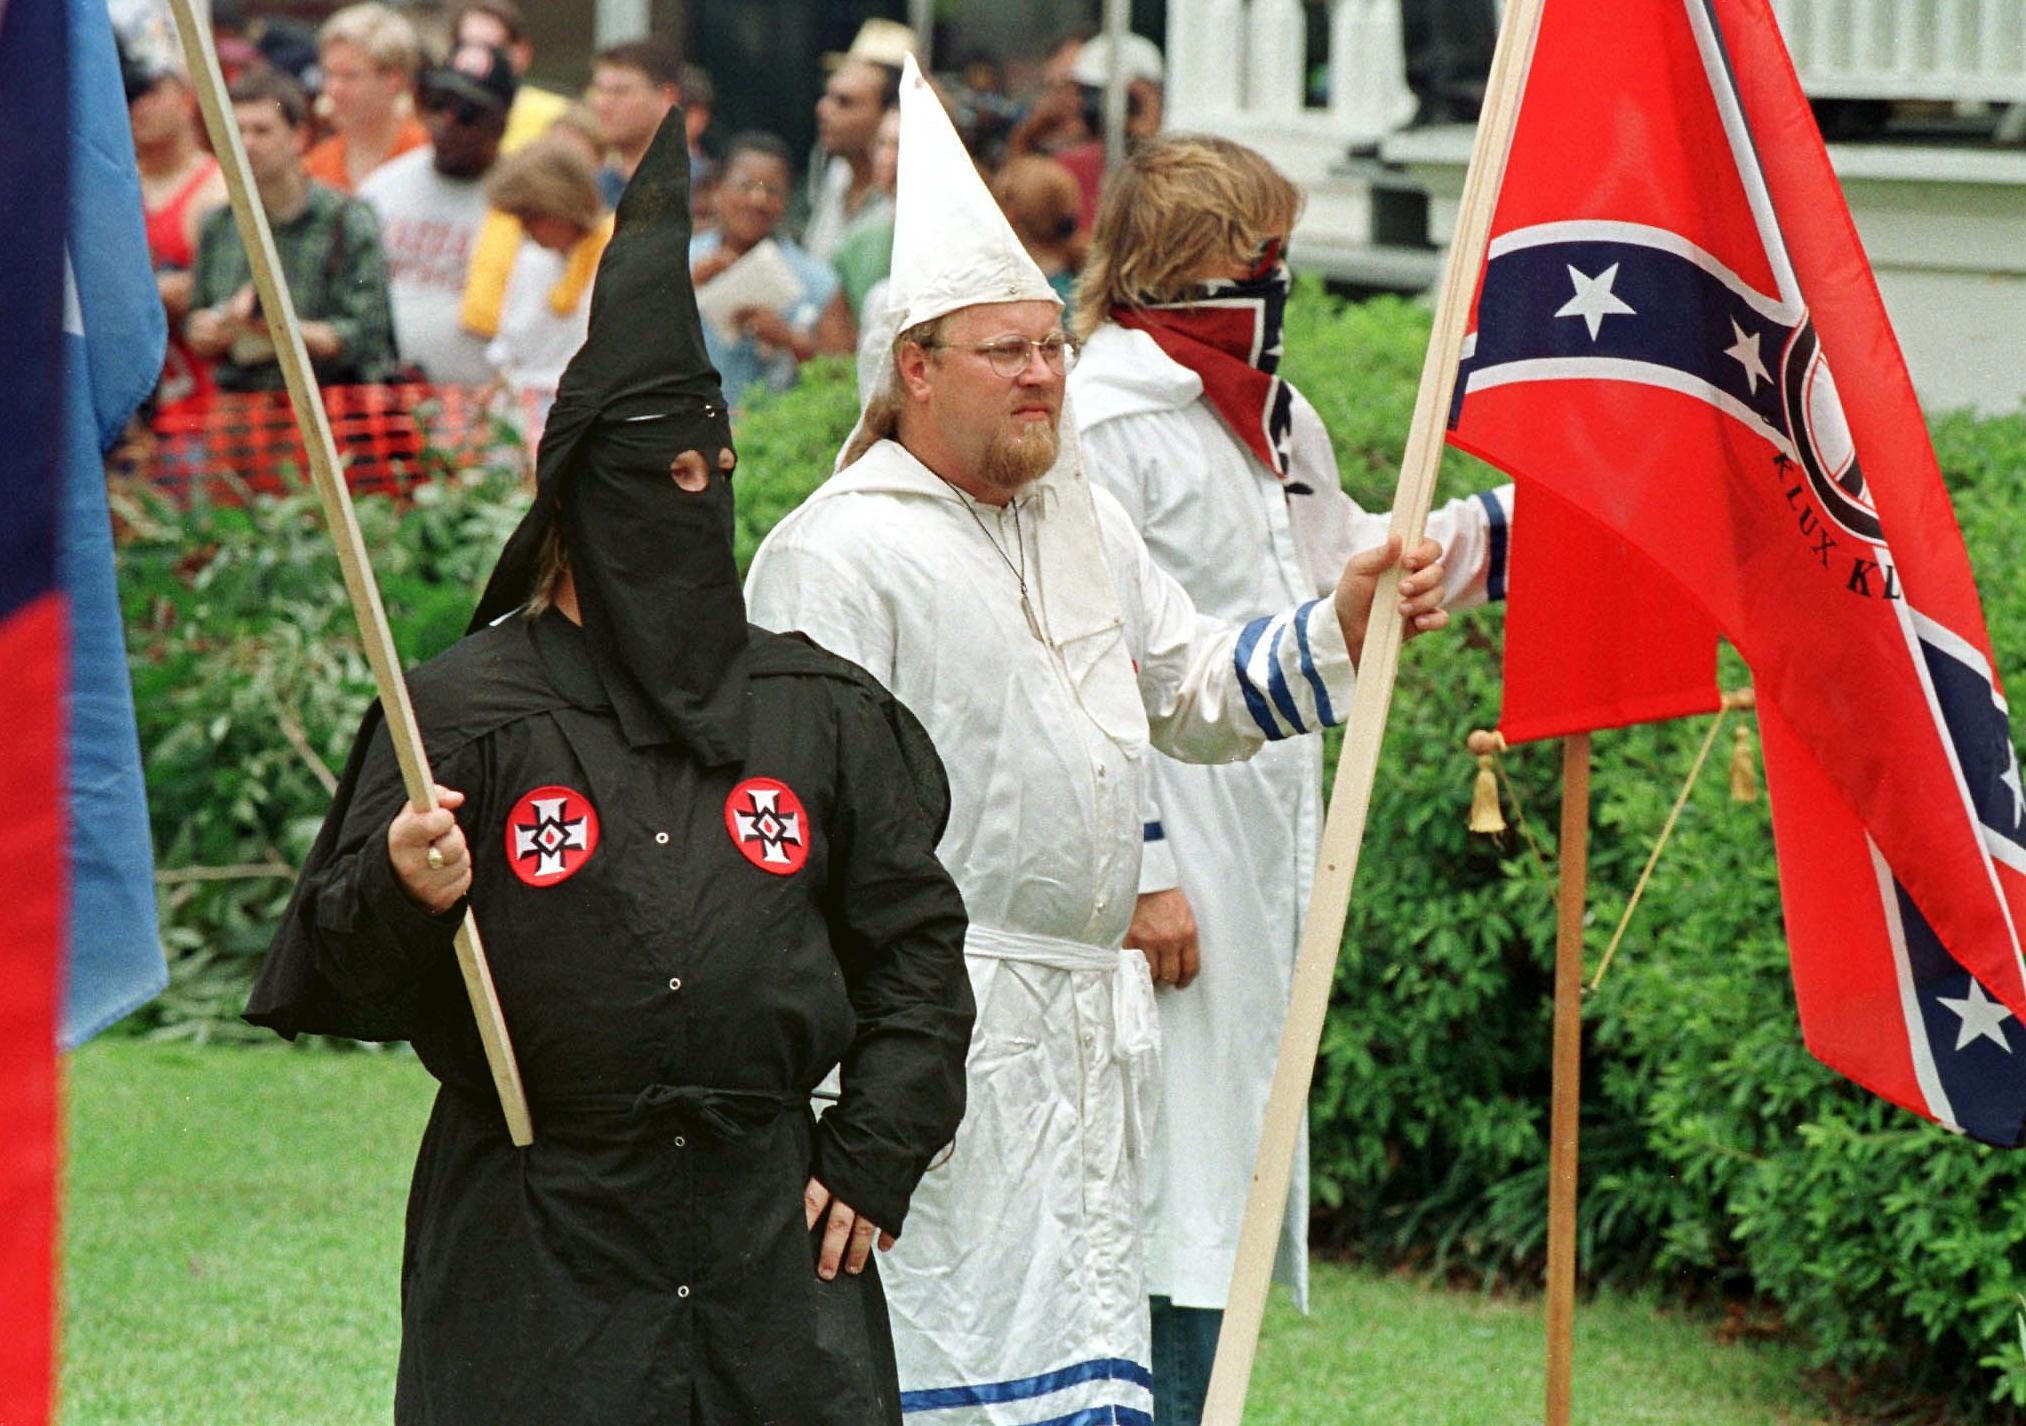 Members of the Ku Klux Klan stand outside a courthouse lawn in Jasper, Texas